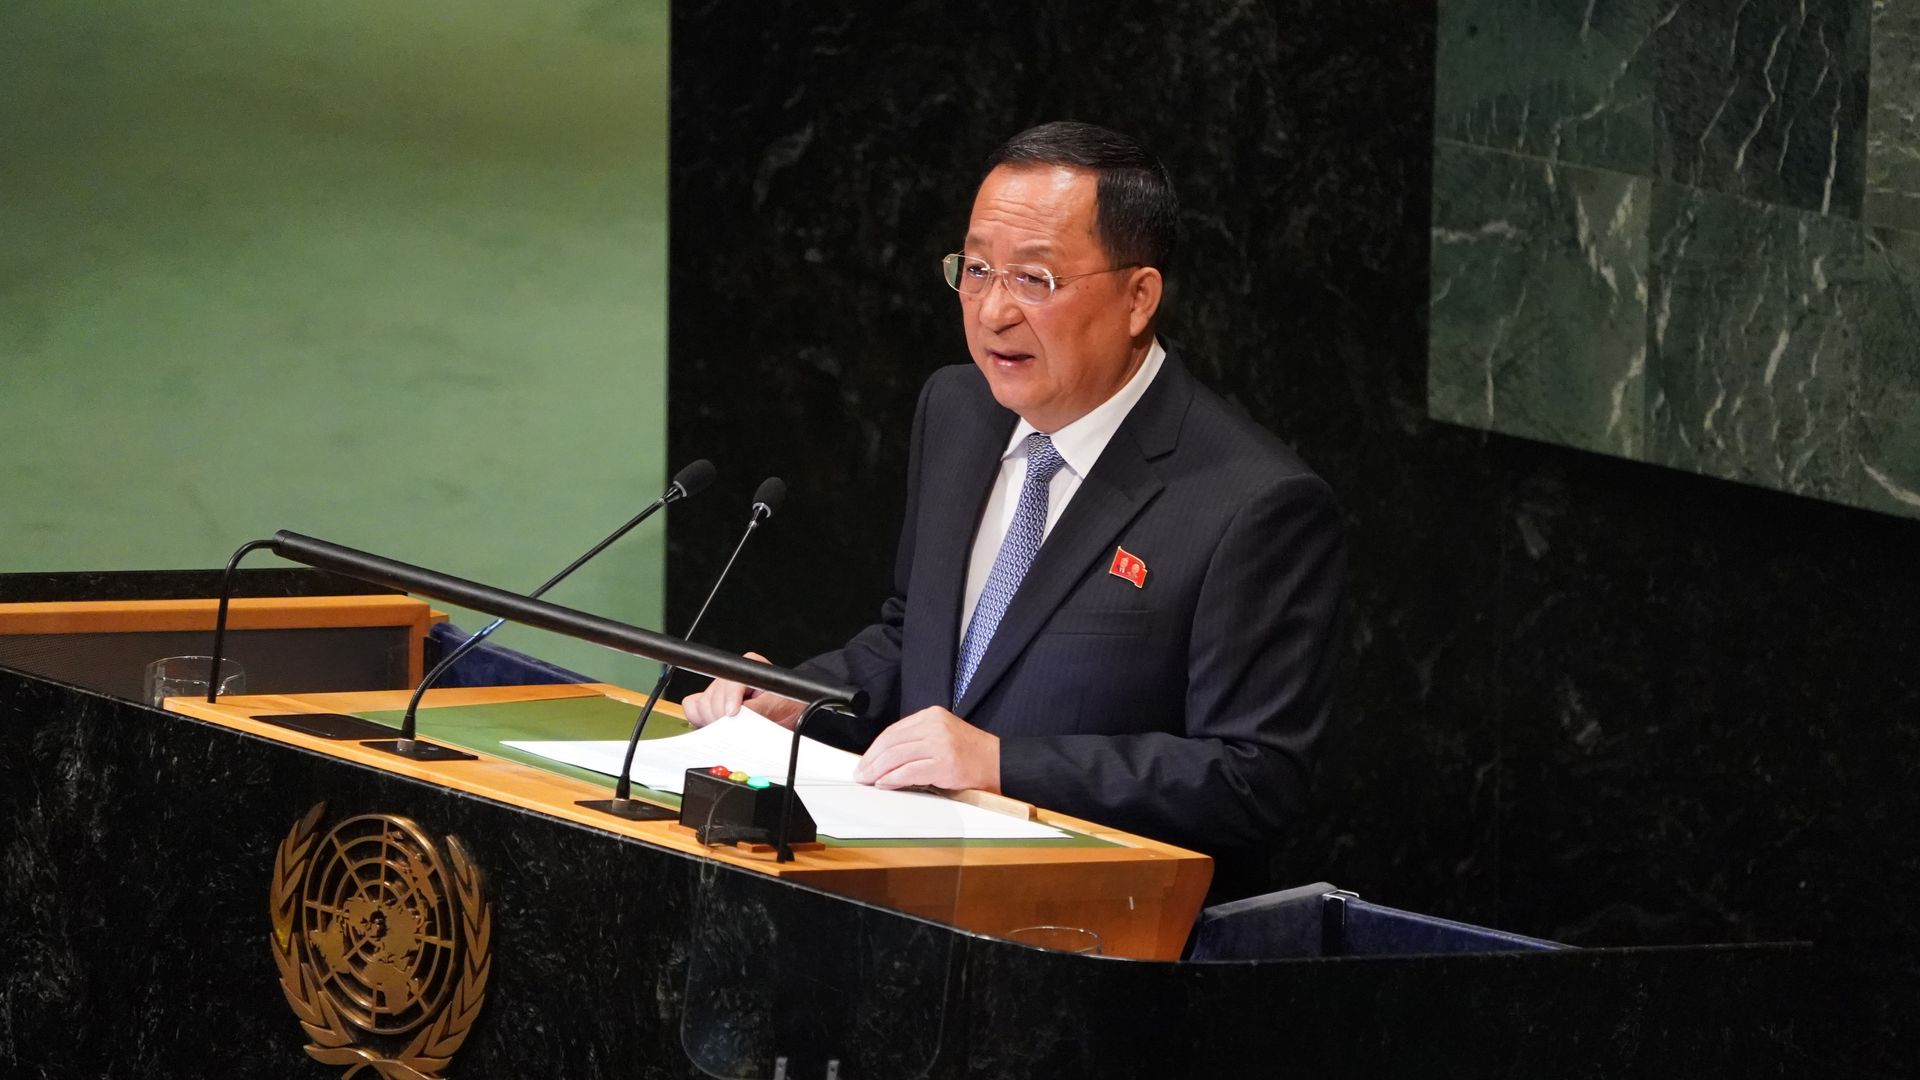 North Korean foreign minister speaking at the UN